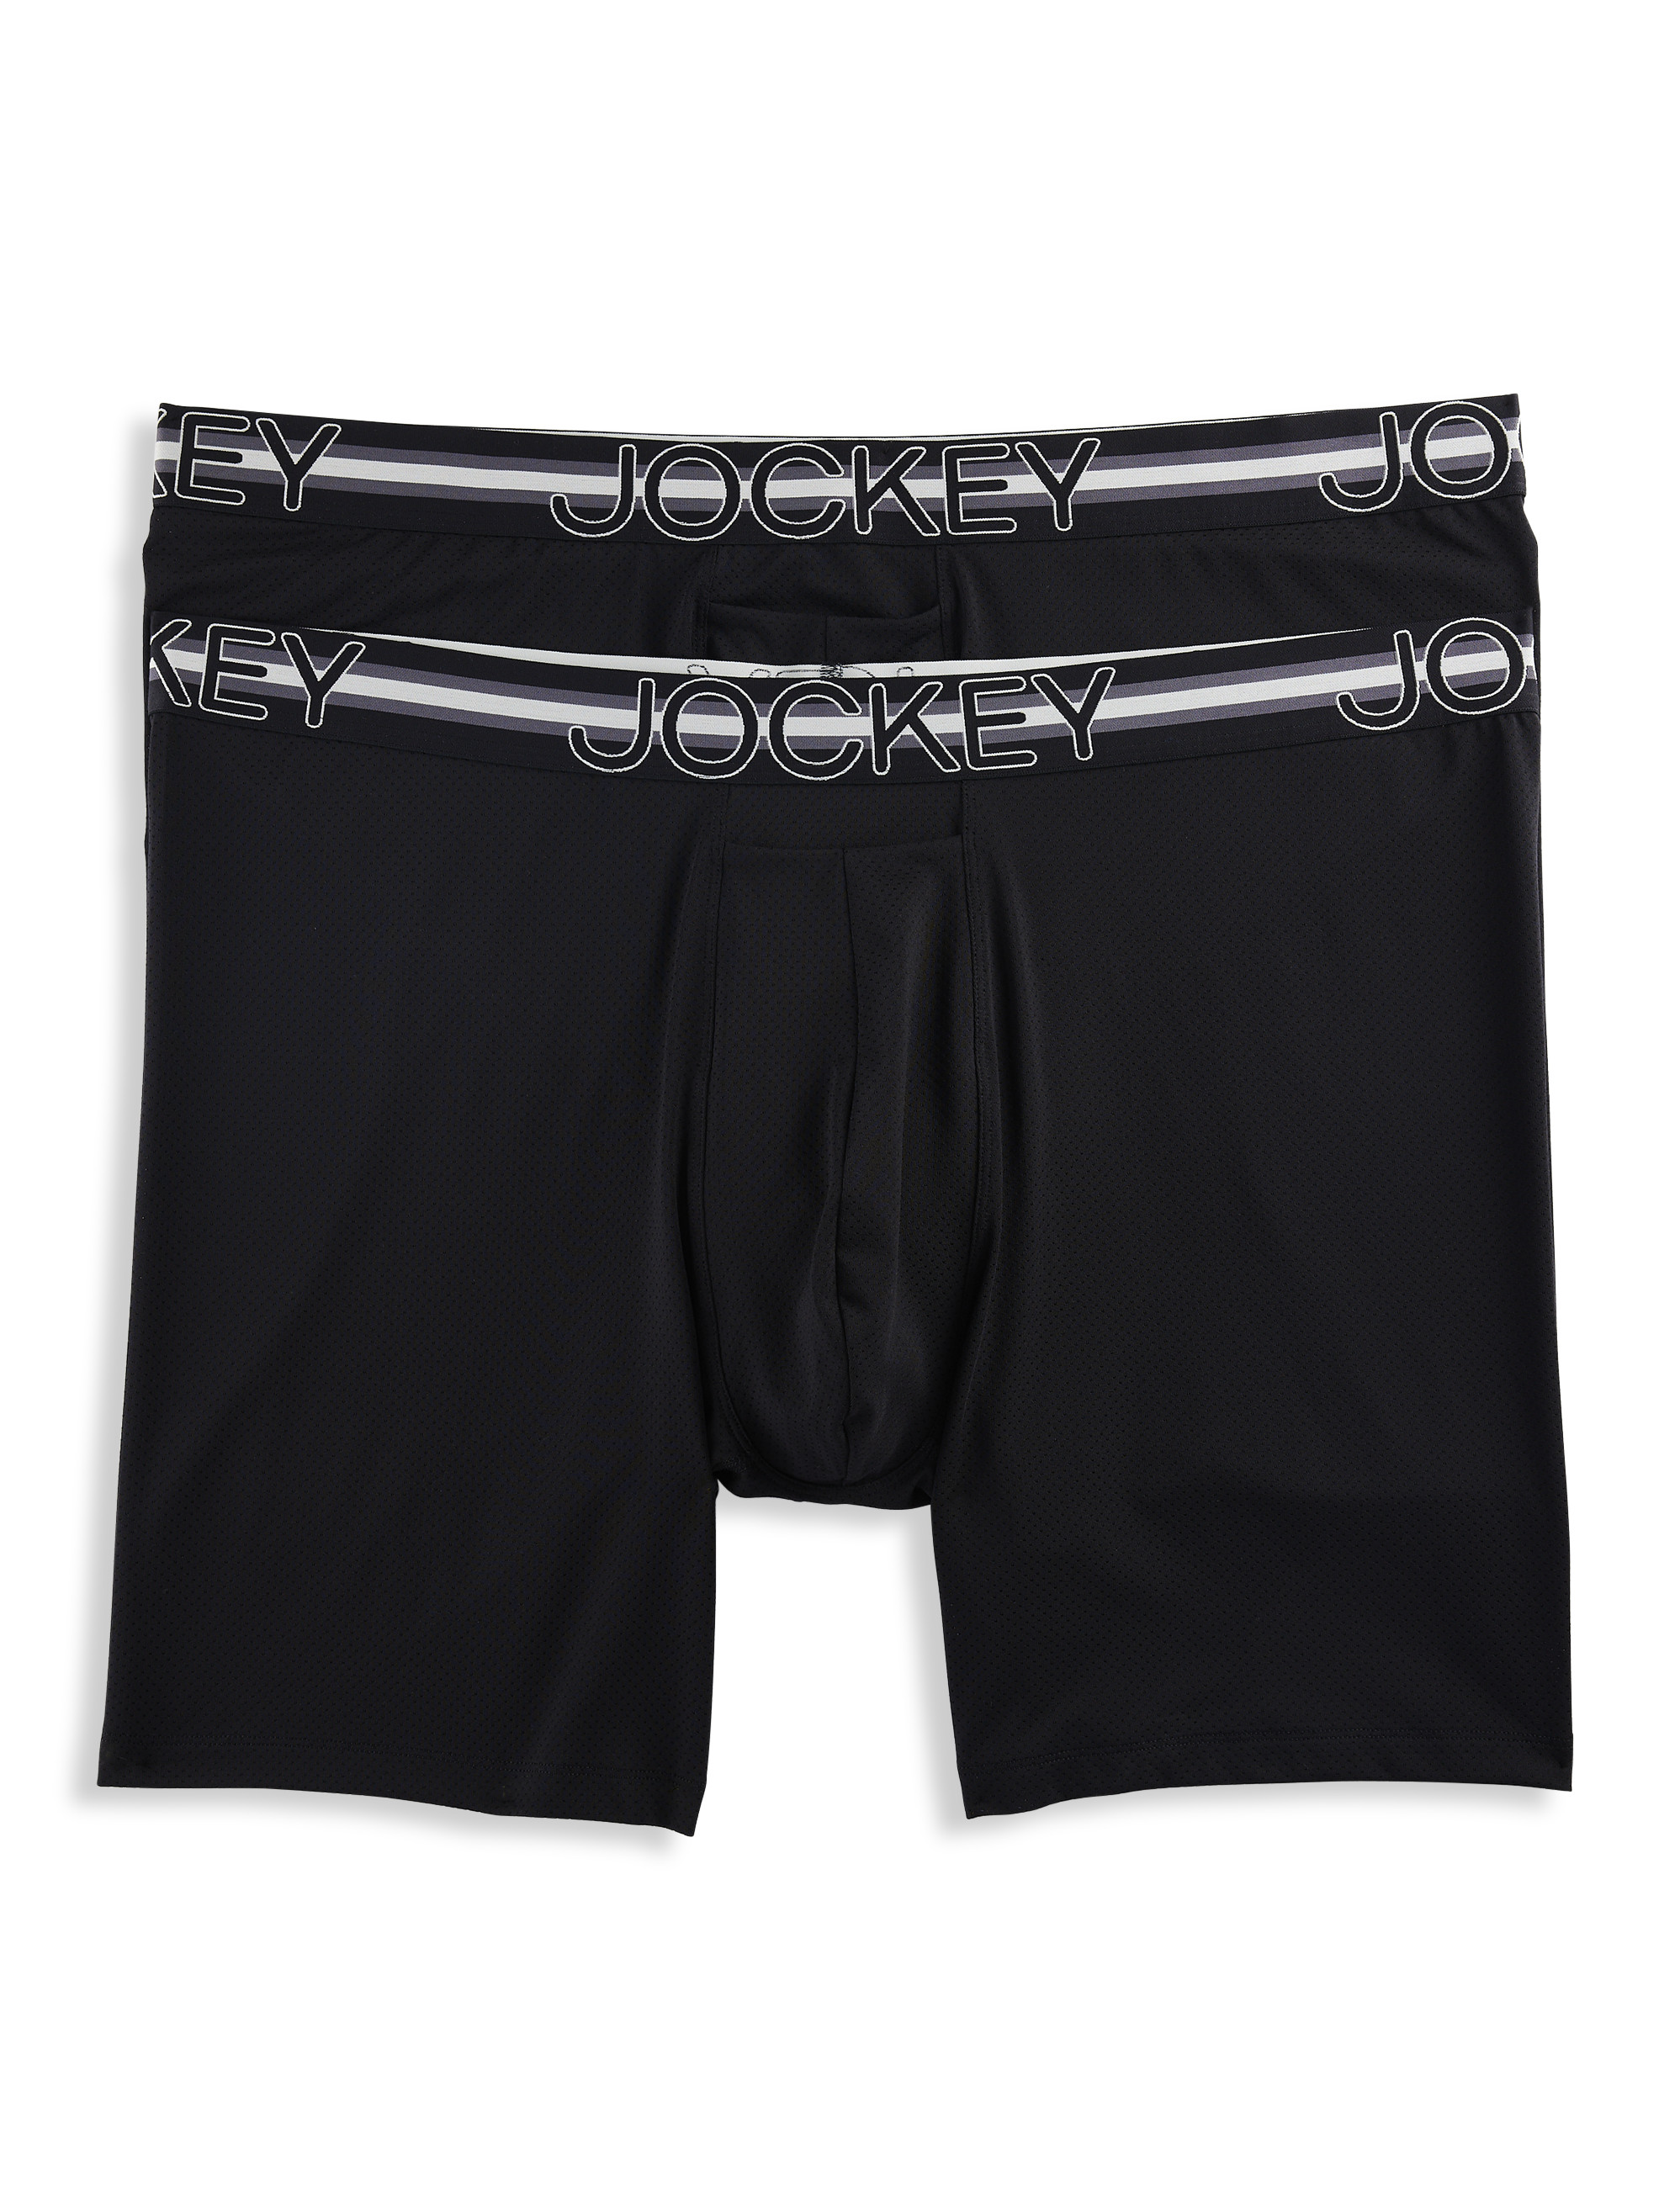 Columbia  Exclusive 6 Pack Performance Boxer Brief, Black